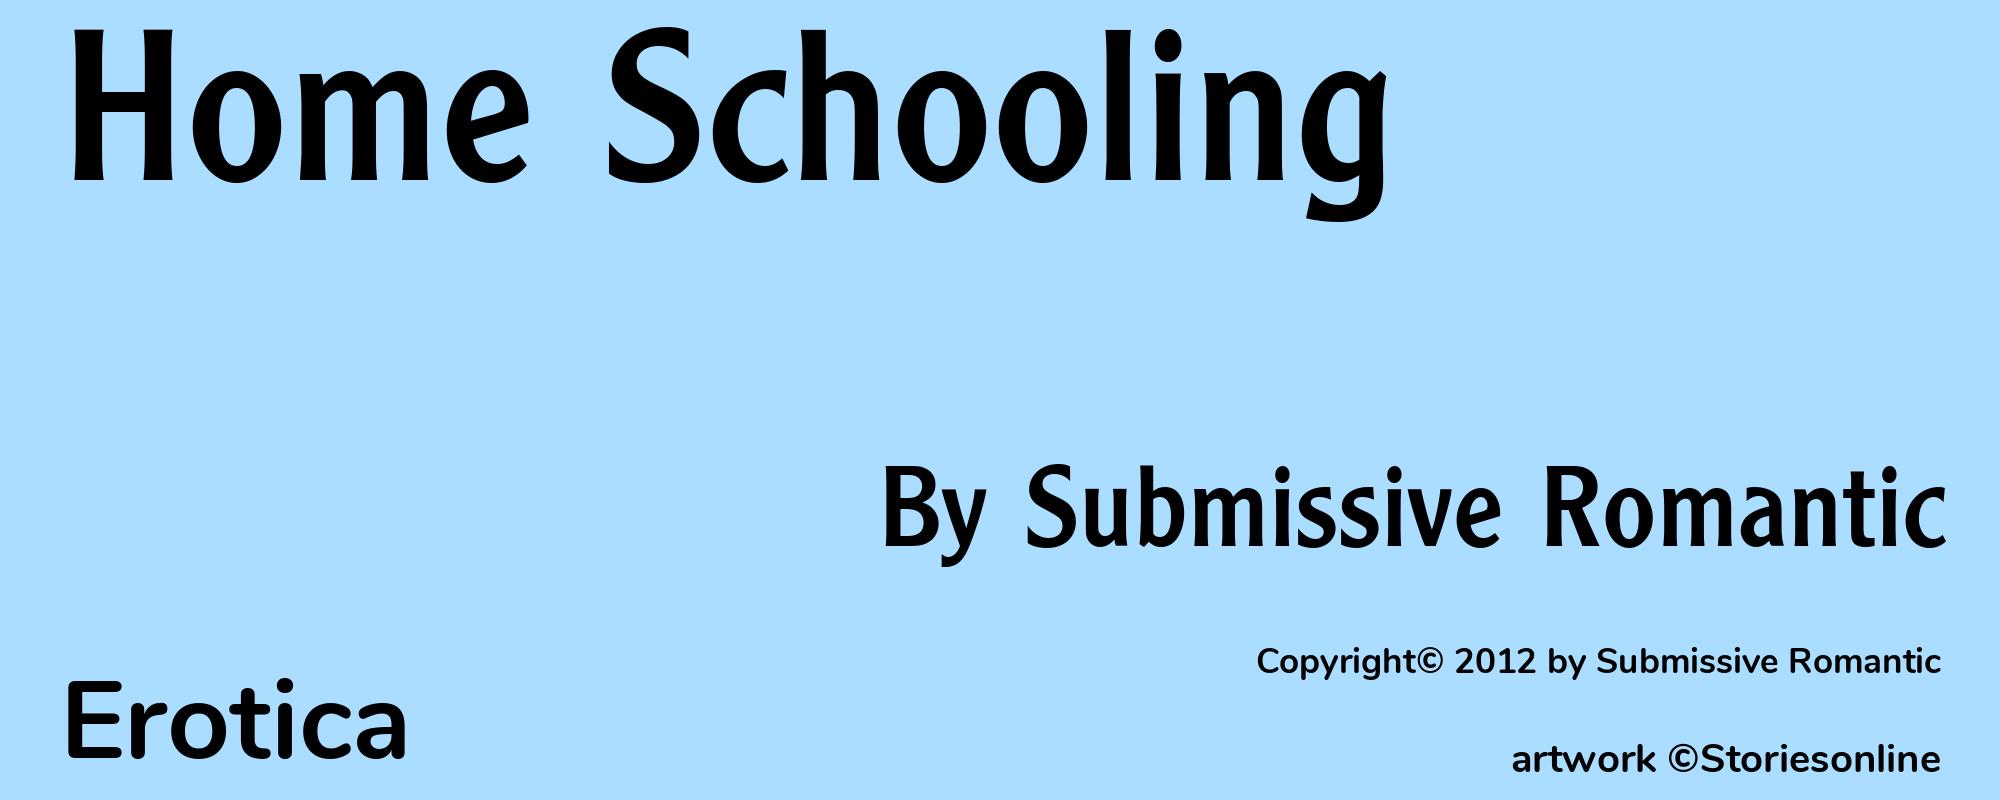 Home Schooling - Cover